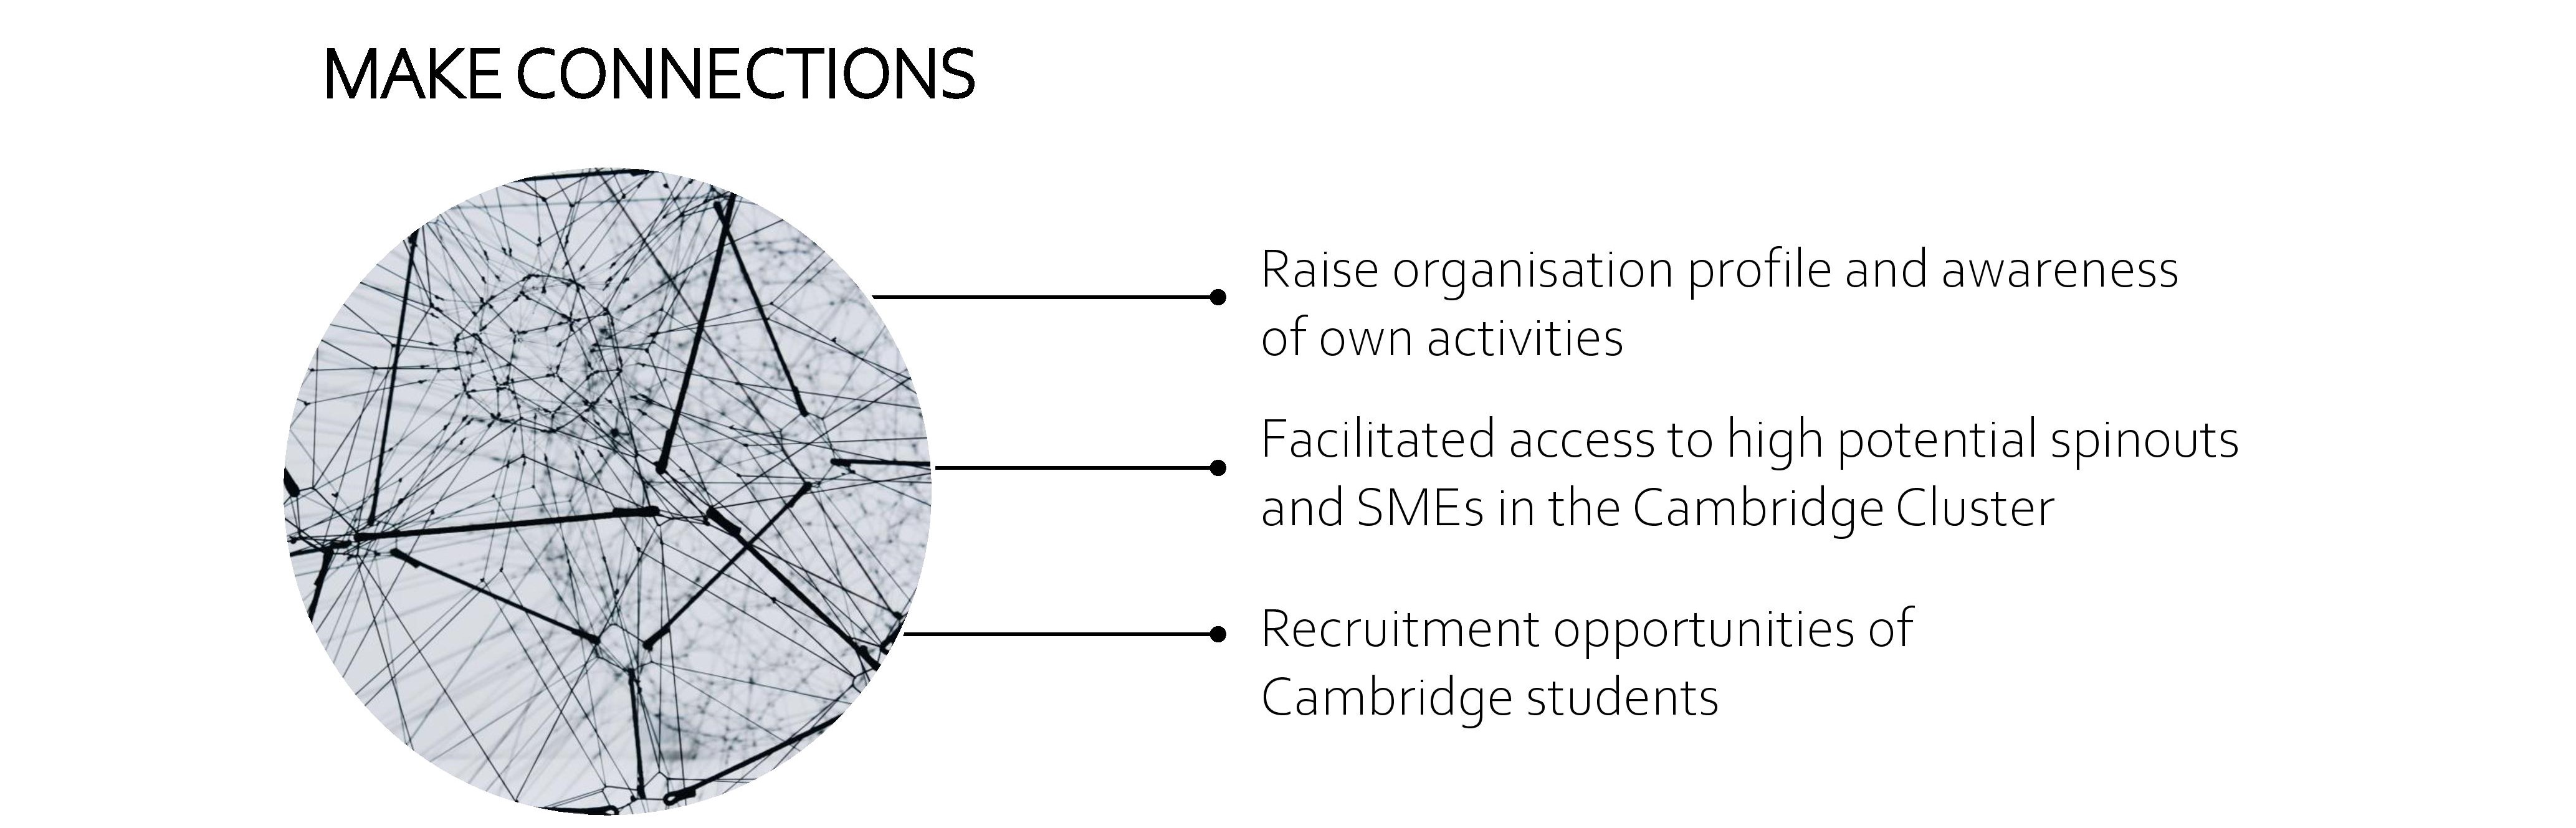 MAKE CONNECTIONS. Raise organisation profile and awareness of own activities. Facilitated access to high potential spinouts and SMEs in the Cambridge Cluster. Recruitment opportunities of Cambridge students.